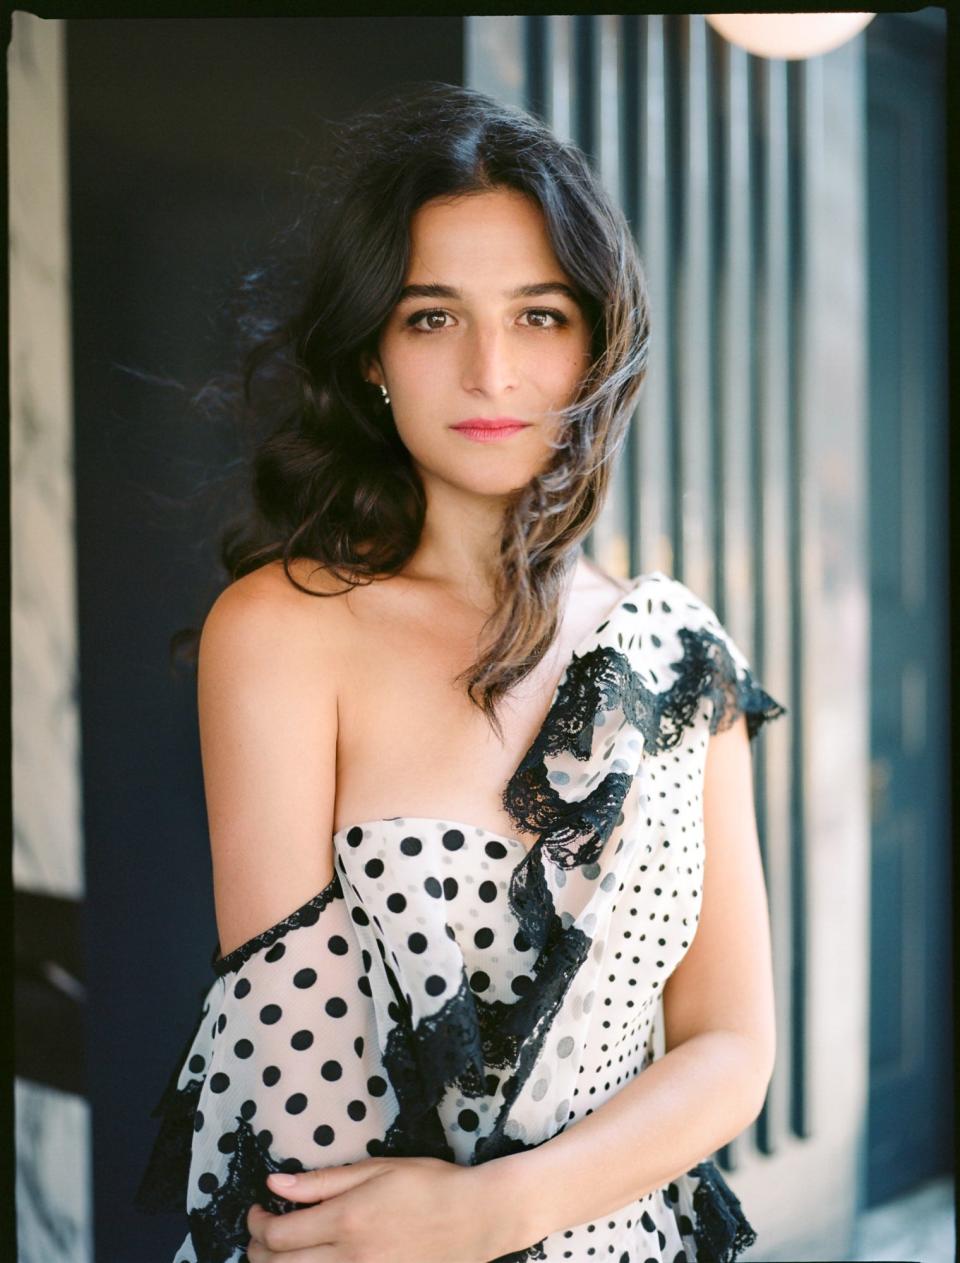 Jenny Slate, an actress, comedian and author who is a Massachusetts native, was awarded the Next Wave Award at the Provincetown film festival on Thursday, June 16, 2022.